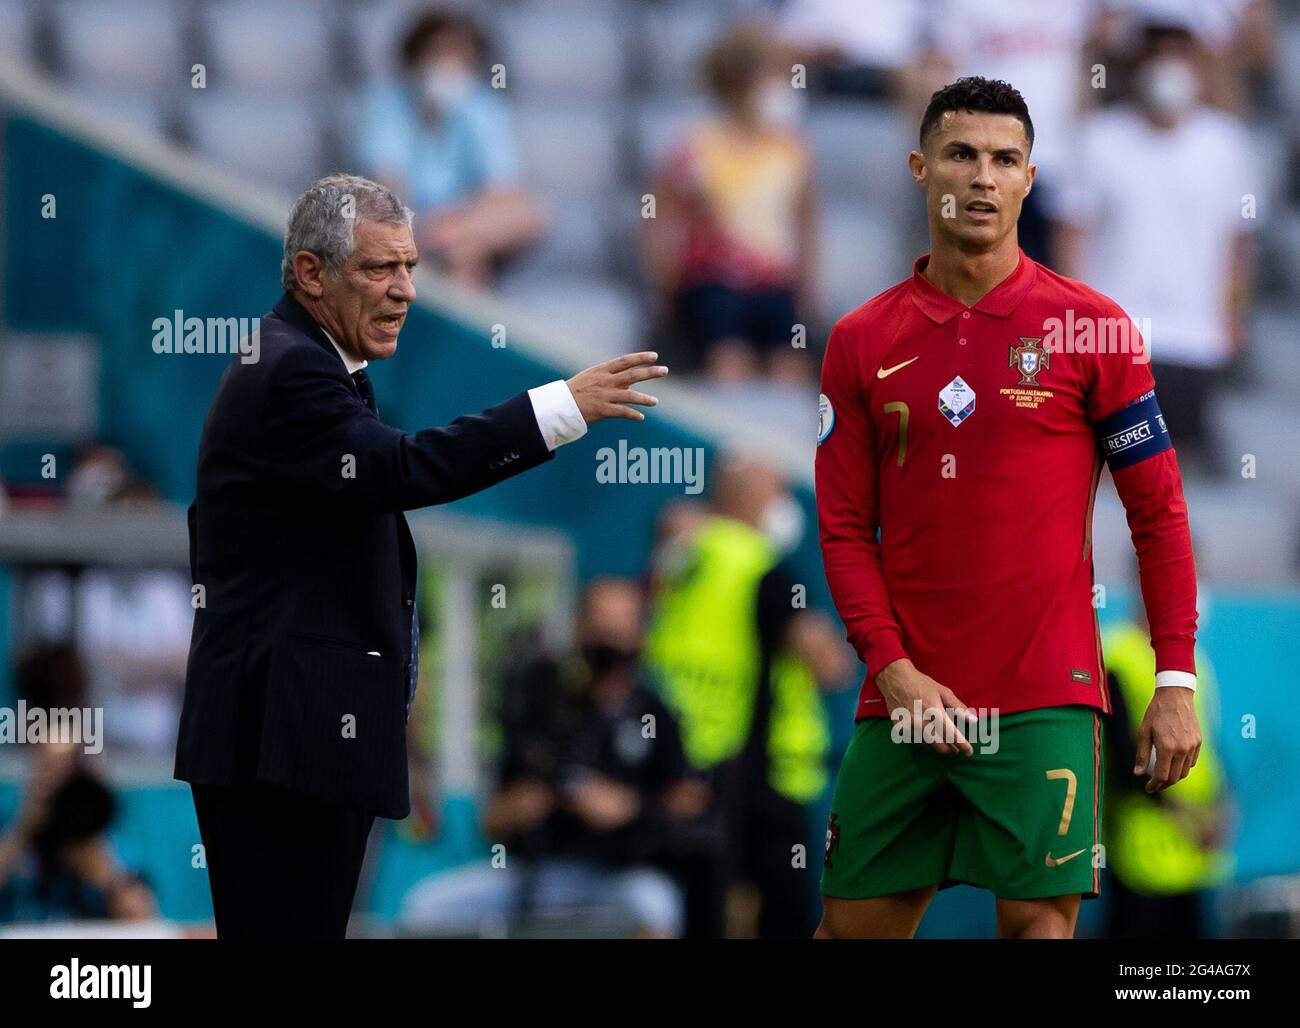 Munich, Germany. 19th June, 2021. Football: European Championship, Portugal - Germany, preliminary round, Group F, matchday 2, at the EM Arena in Munich. Portugal coach Fernando Santos (l) talks to Cristiano Ronaldo. Credit: Christian Charisius/dpa/Alamy Live News Stock Photo